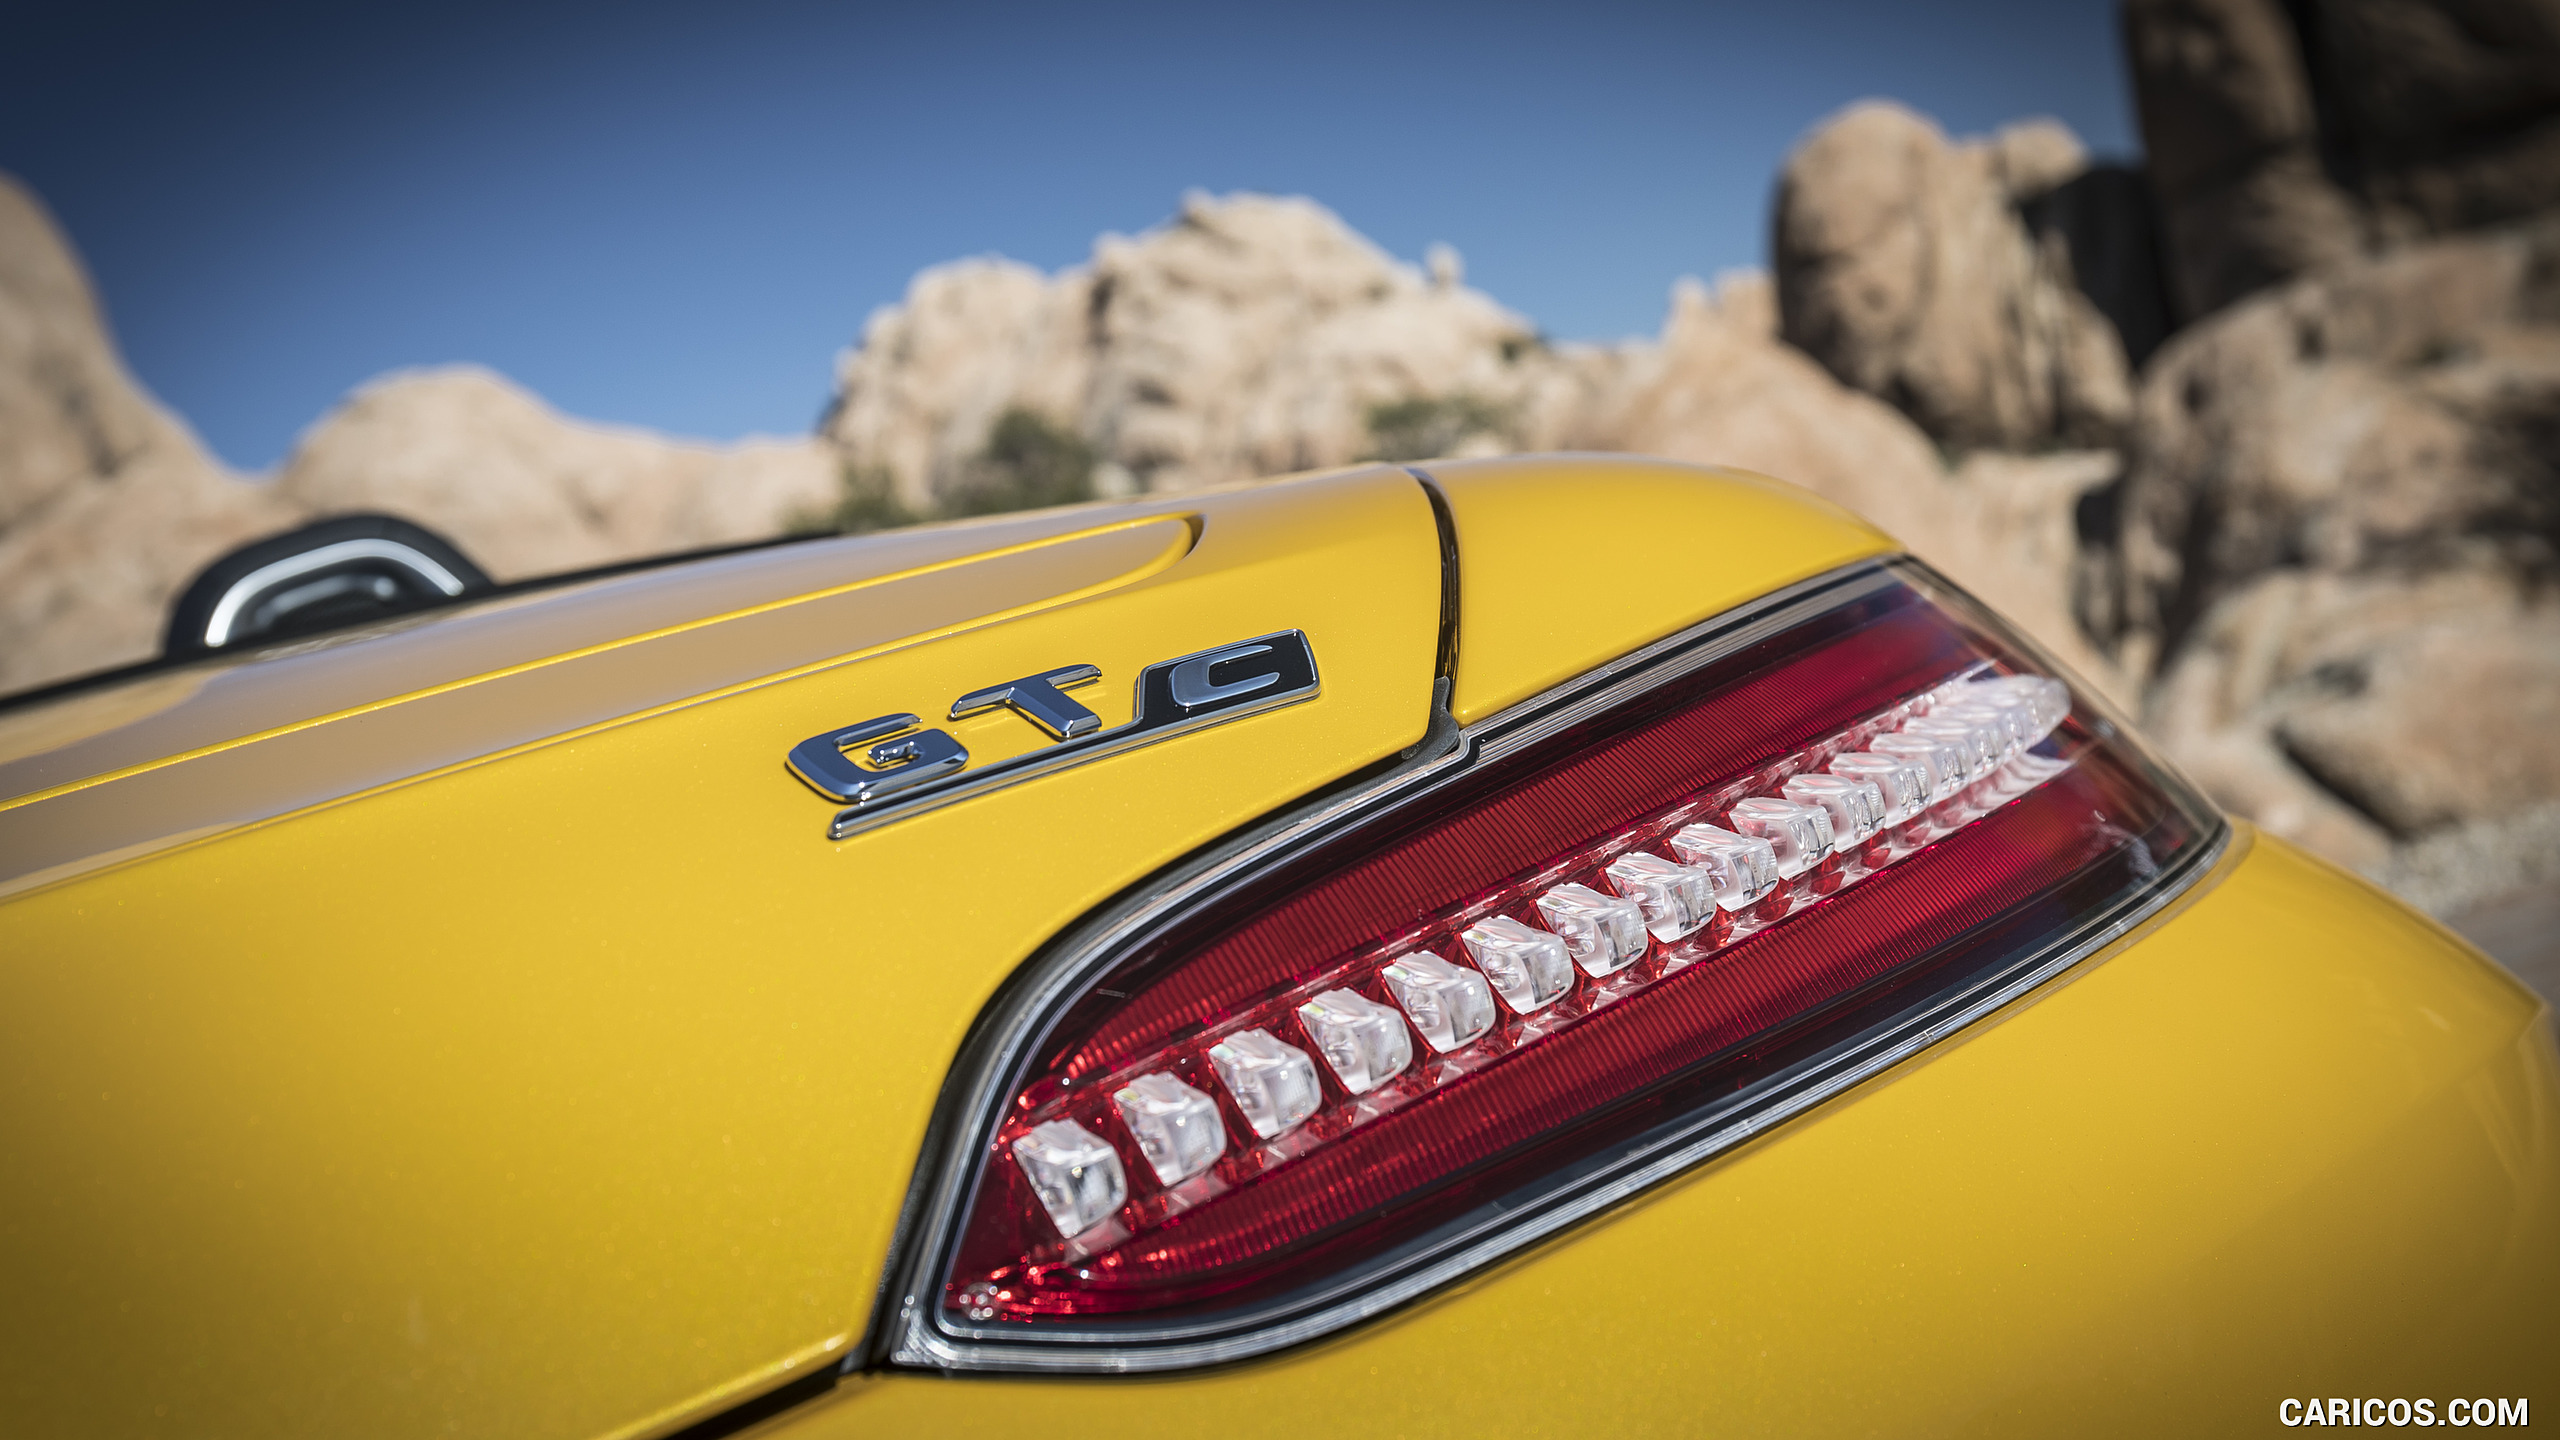 2018 Mercedes-AMG GT C Roadster - Tail Light, #262 of 350